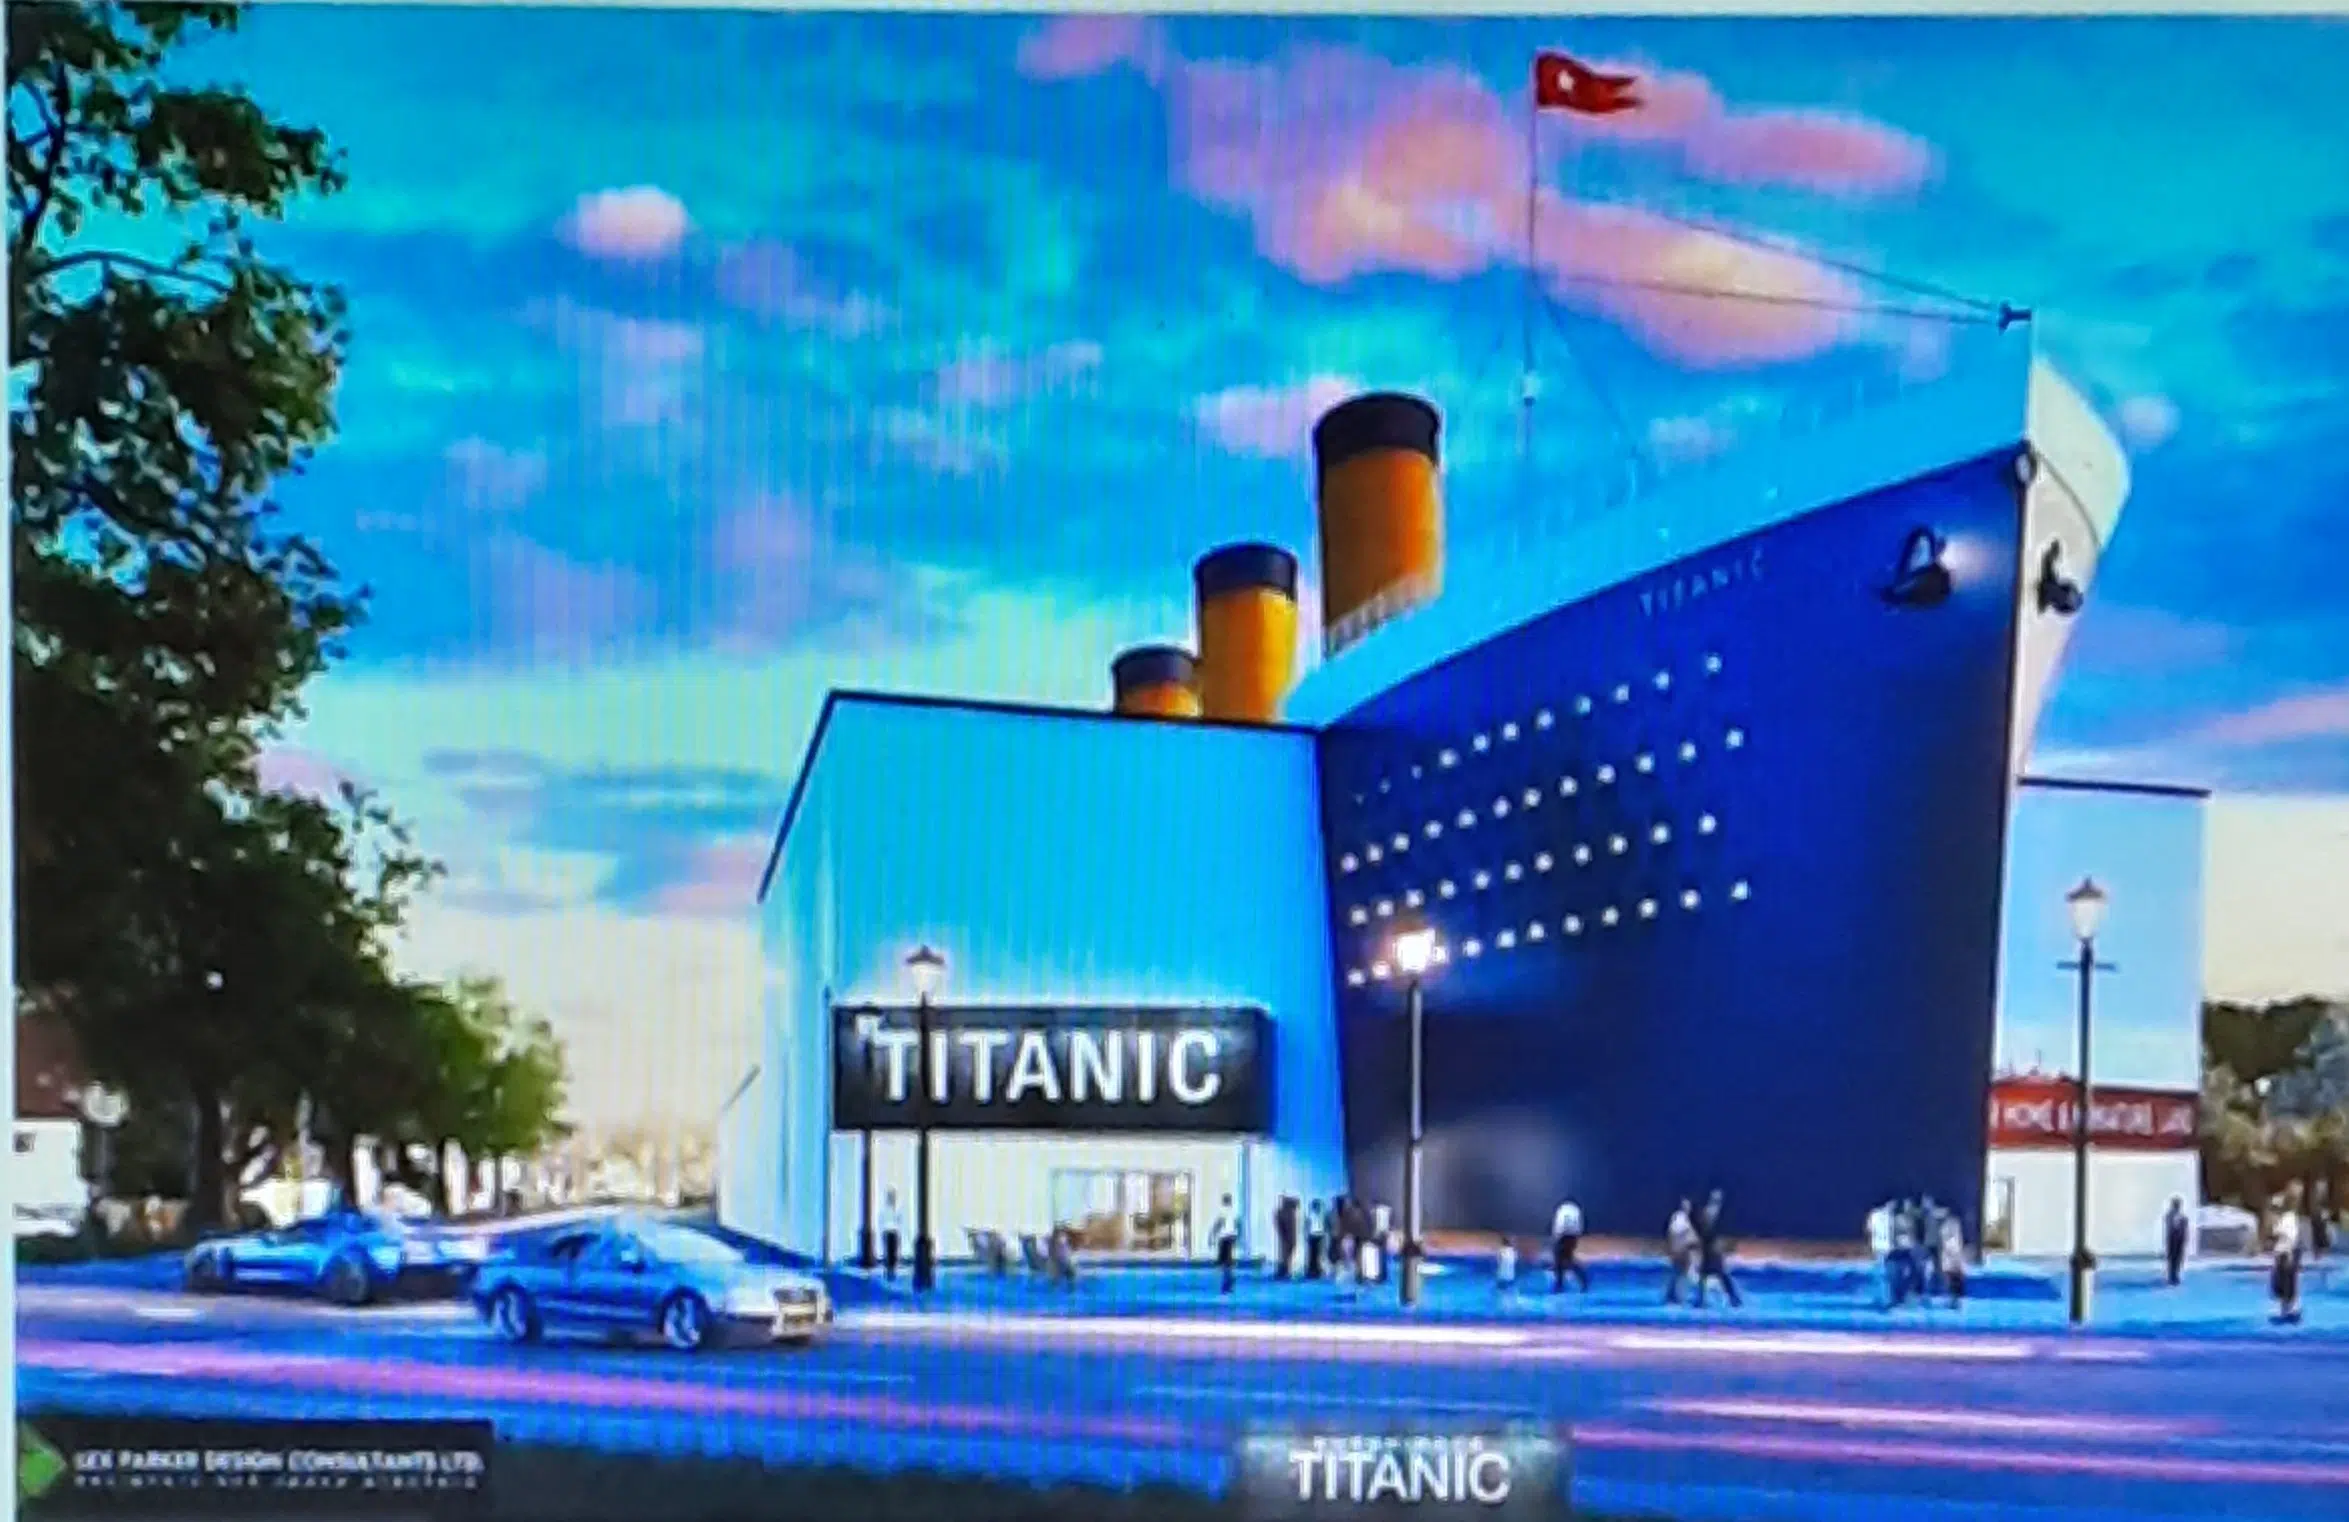 Titanic Hotel plans are for Niagara Falls, not Halifax